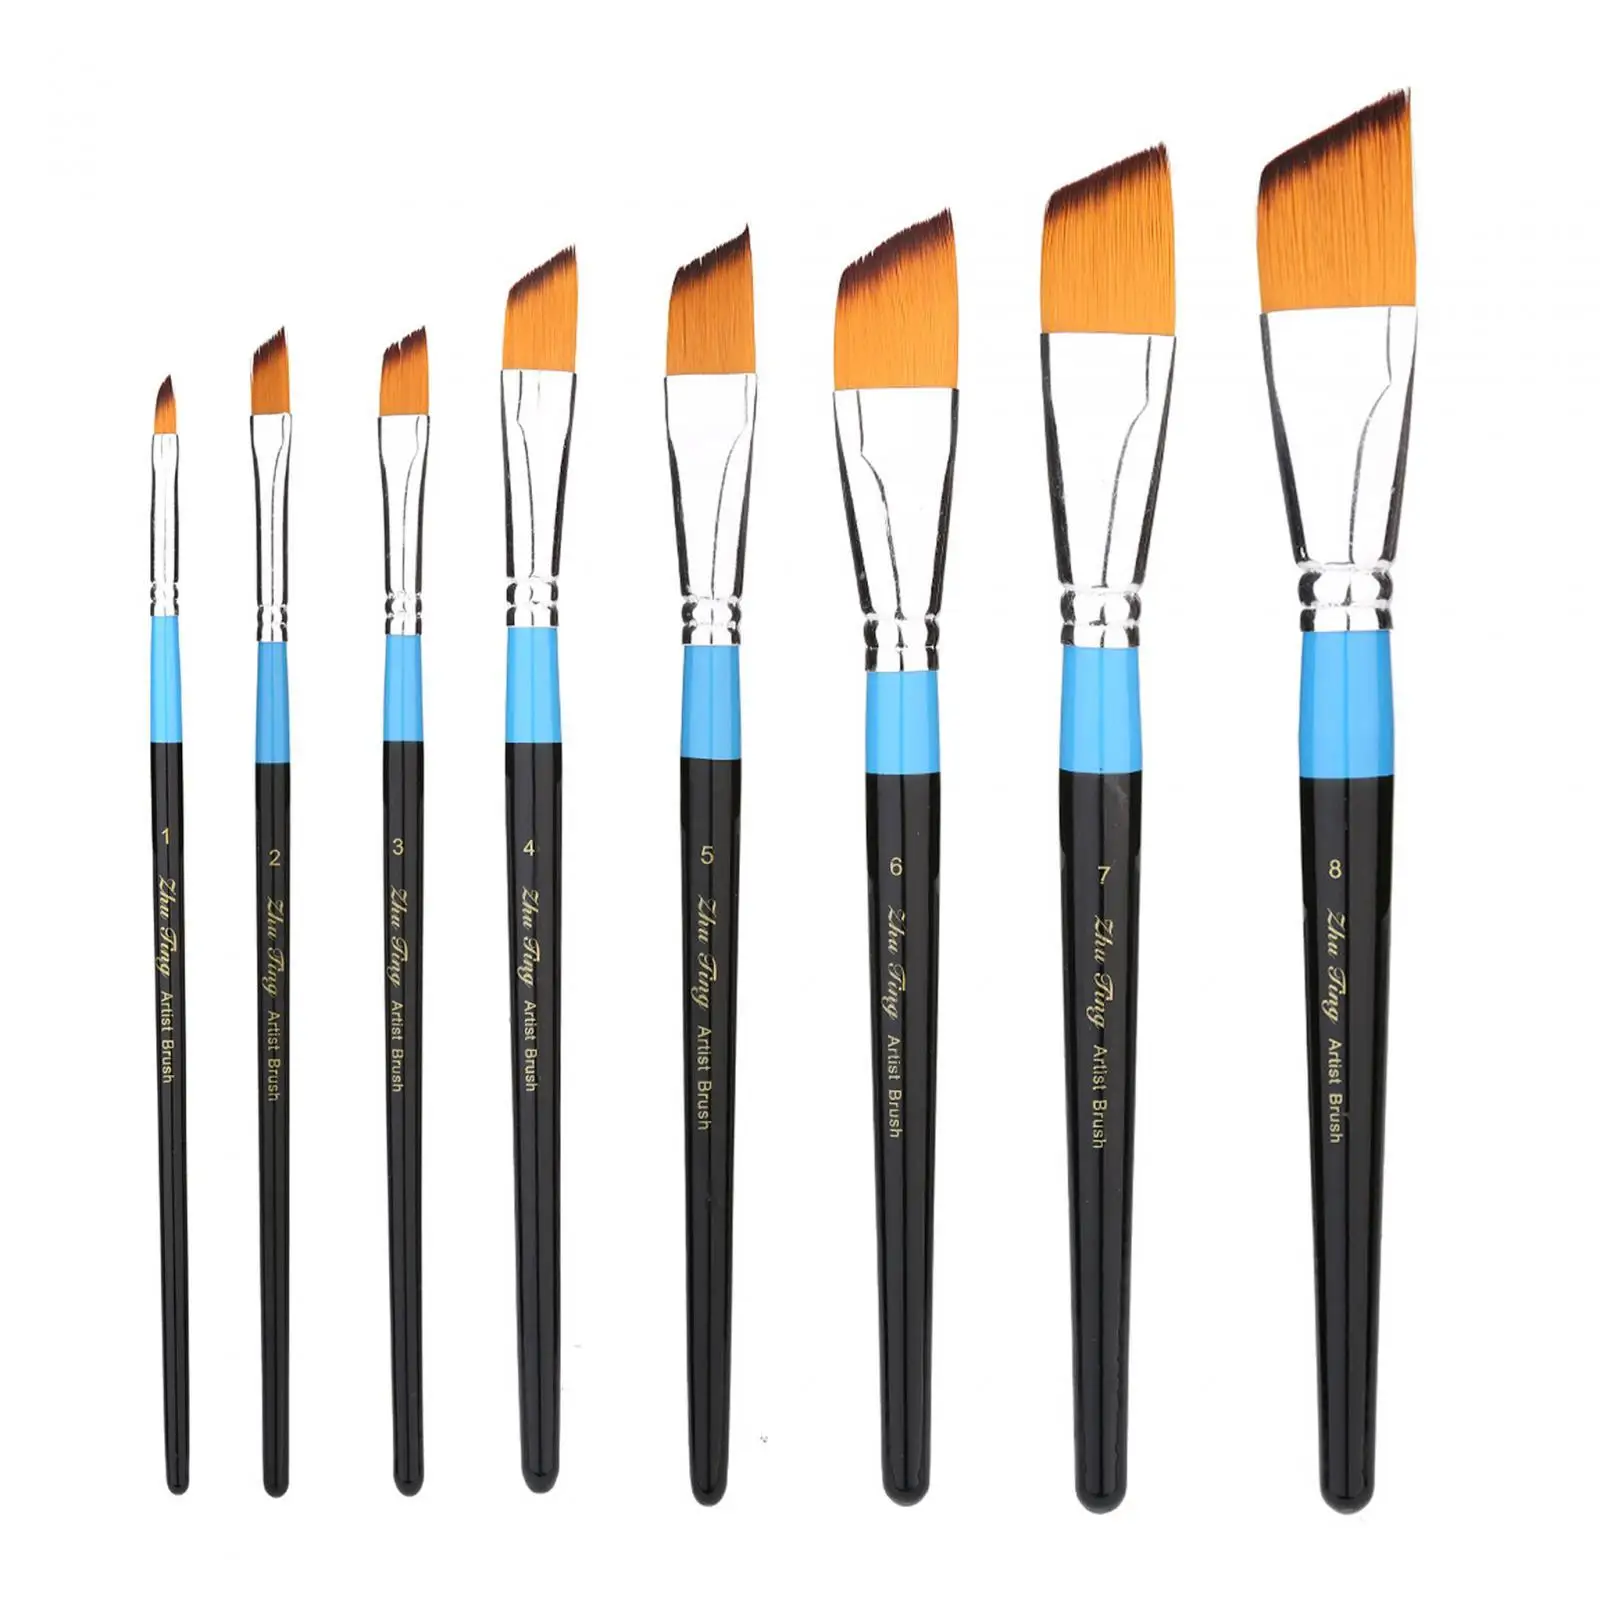 8Pcs Paint Brush Set Professional on Canvas, Wood, Face and Models Nylon Hair Paintbrushes for Gouache Oil Watercolor Painting